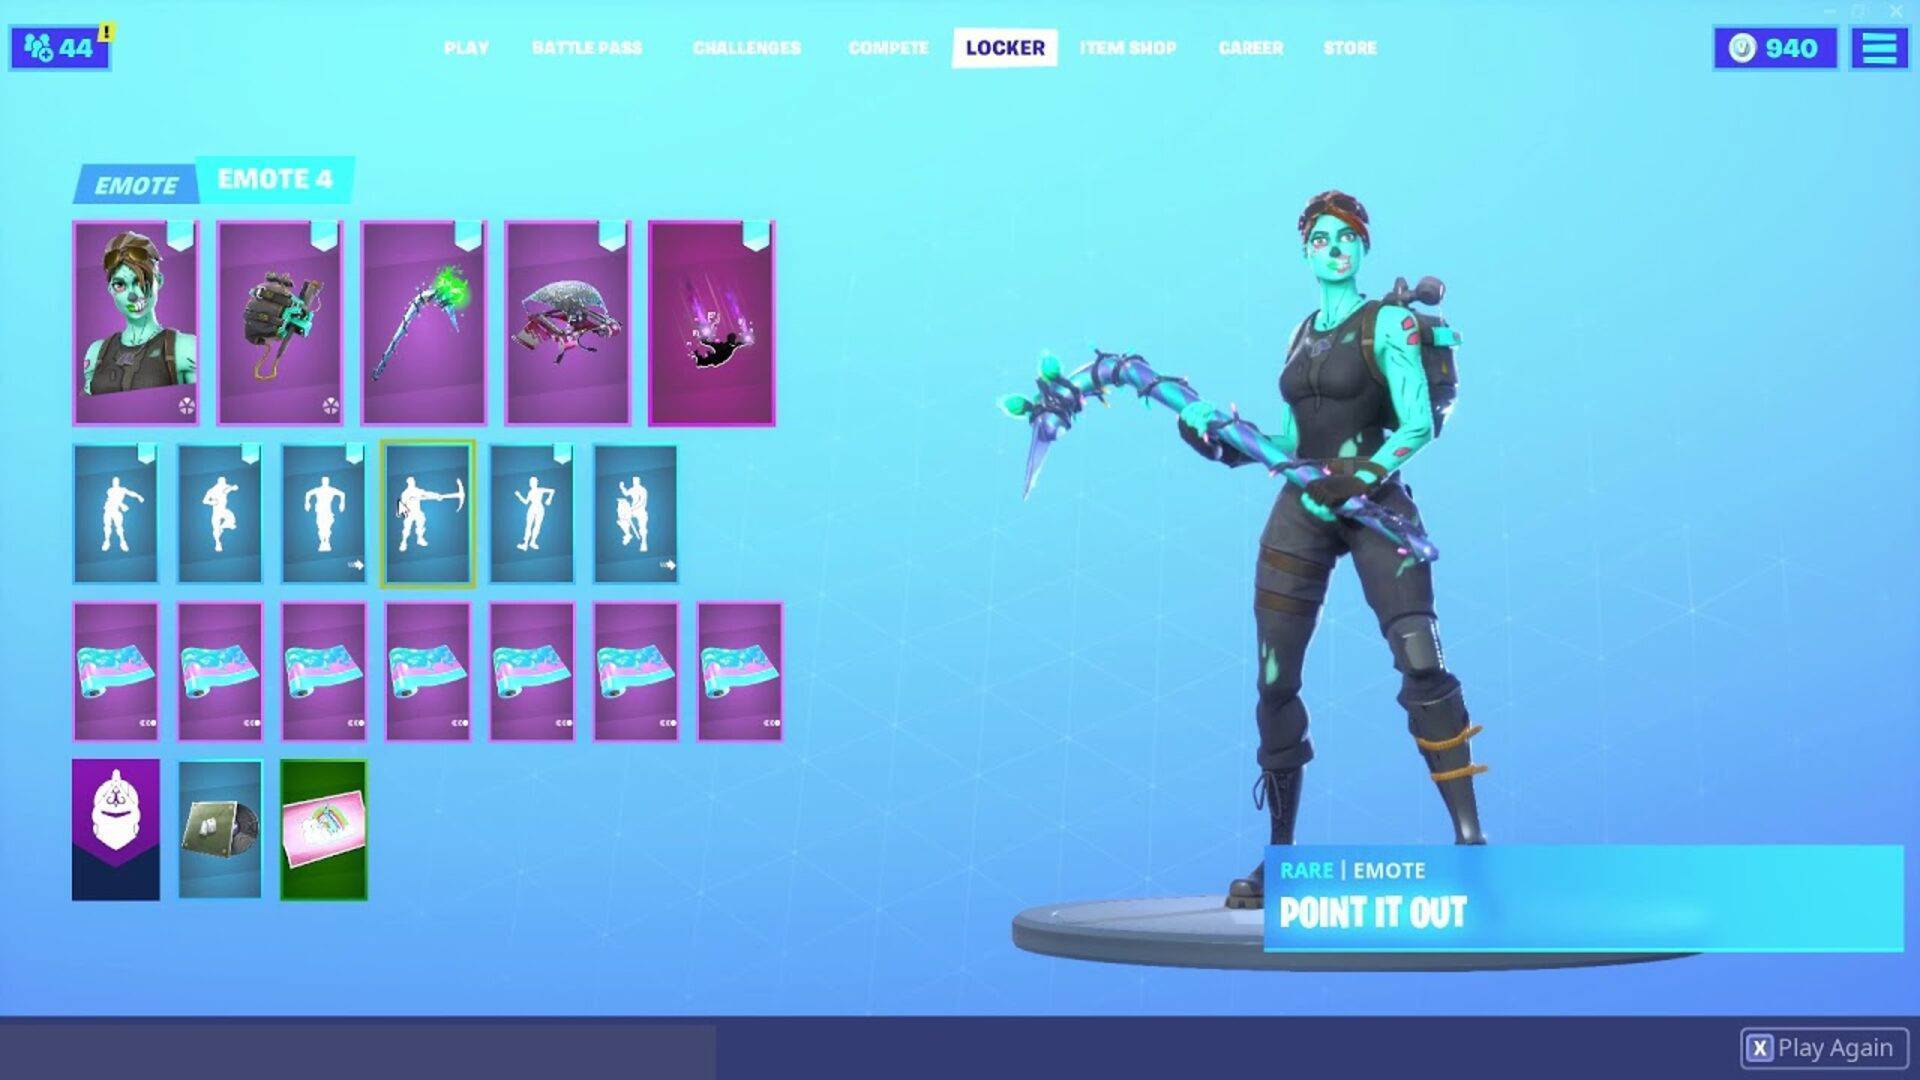 Fortnite Merry Mint Axe Pc Key Cheap Price Of 14 99 For Epic Game Store